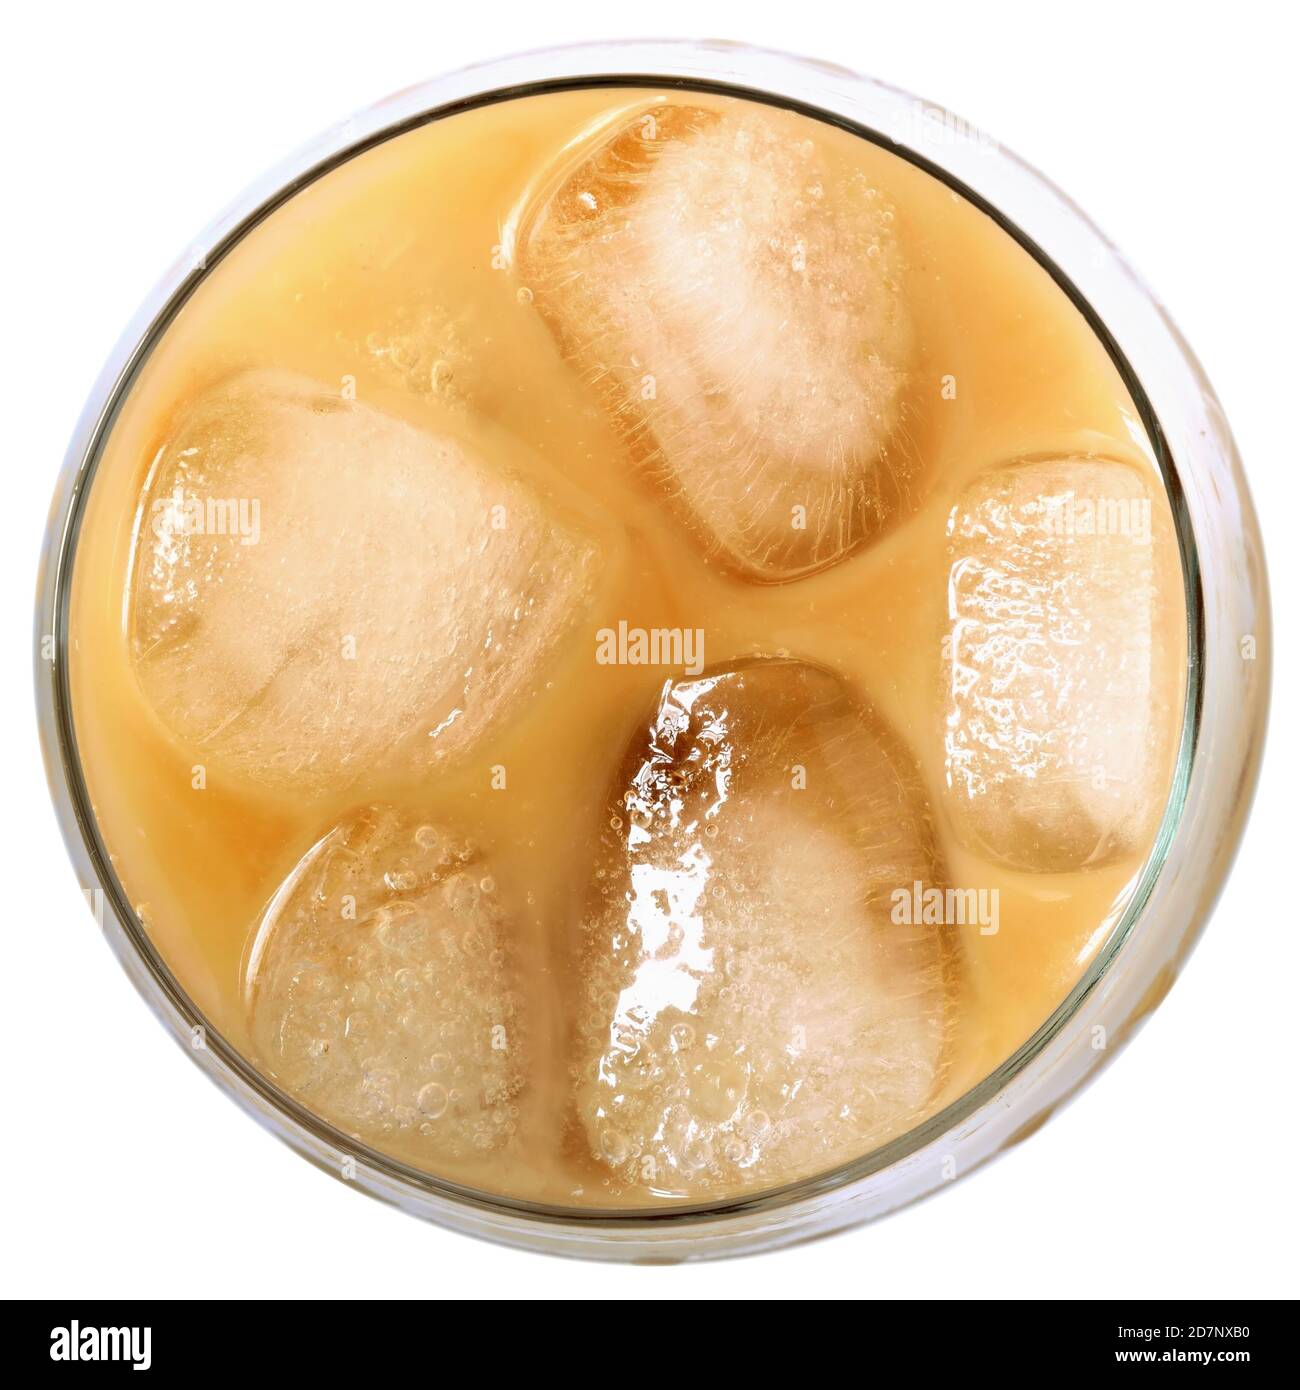 https://c8.alamy.com/comp/2D7NXB0/glass-with-iced-coffee-top-view-isolated-on-white-background-2D7NXB0.jpg